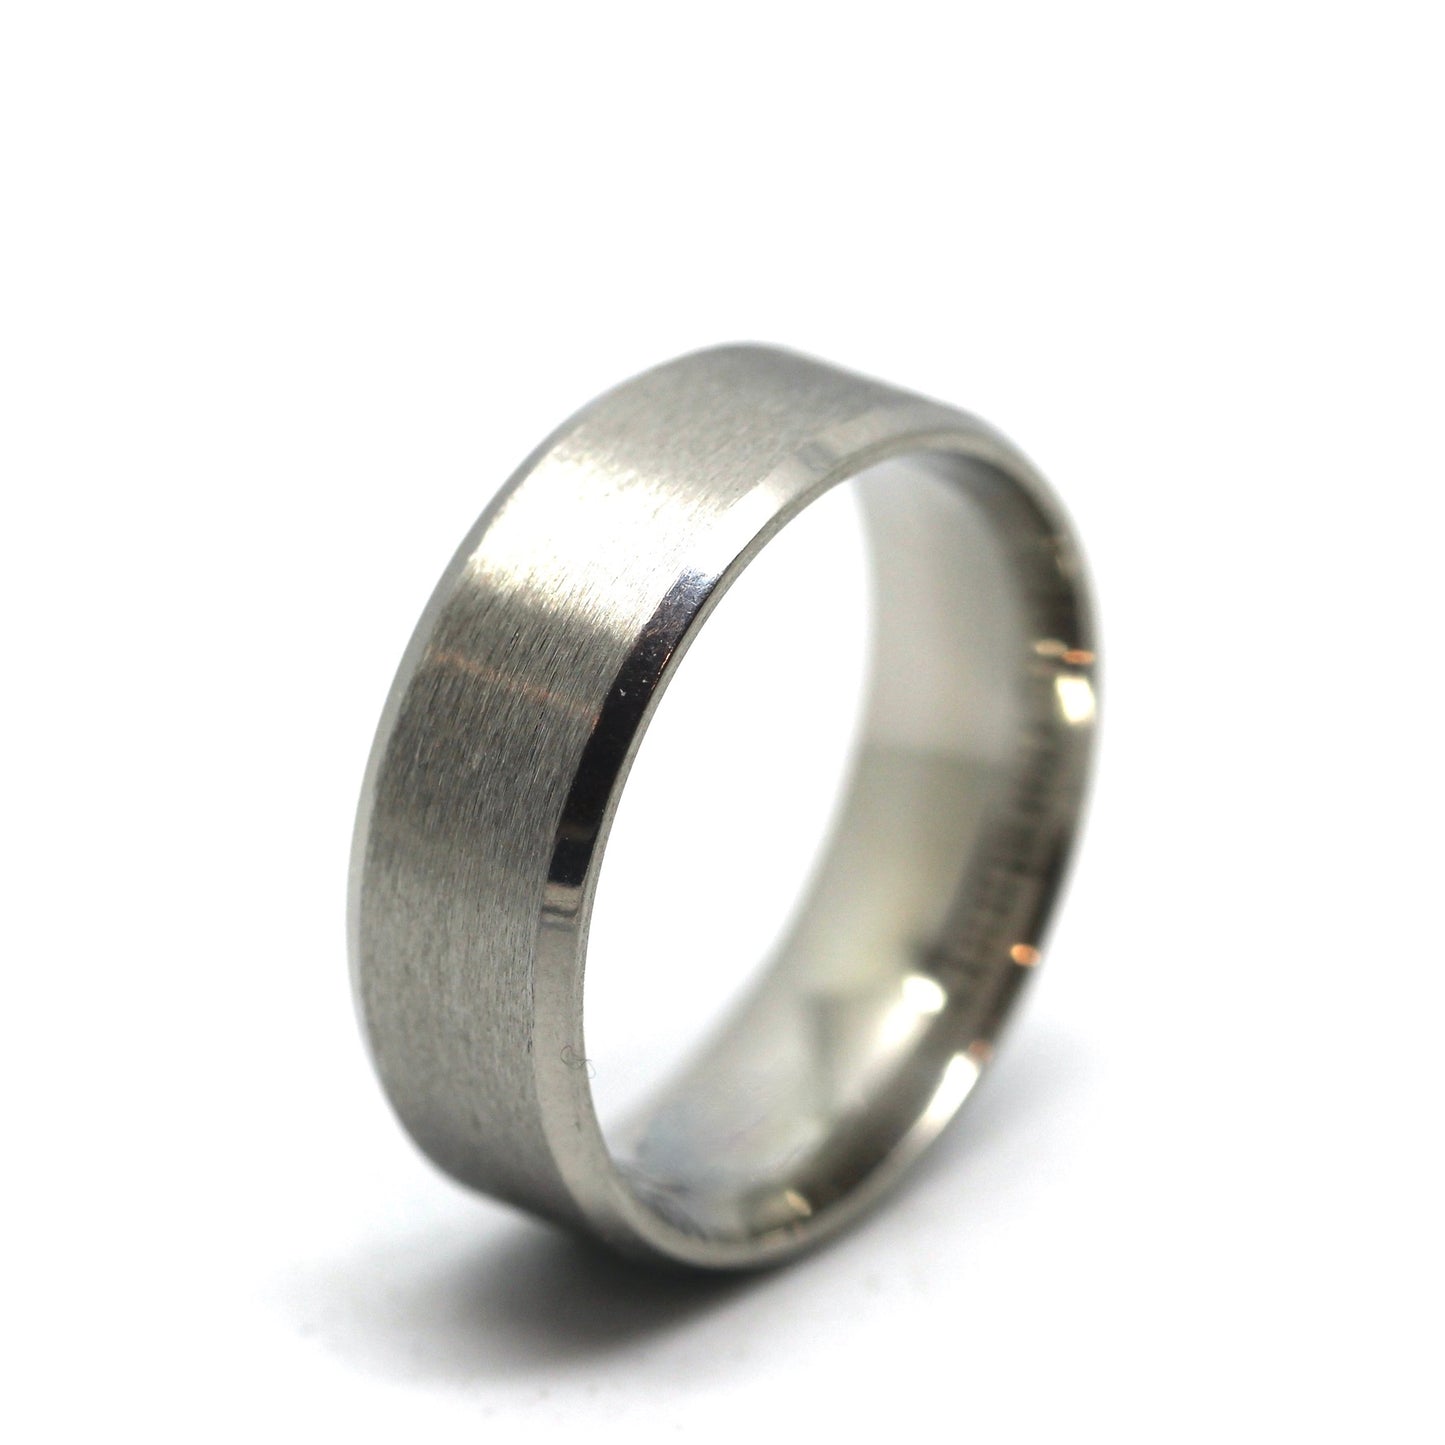 Stainless Steel Band - 8mm Wide – Engravable - Men’s or Ladies Rings – Beveled Edge Matte Finish